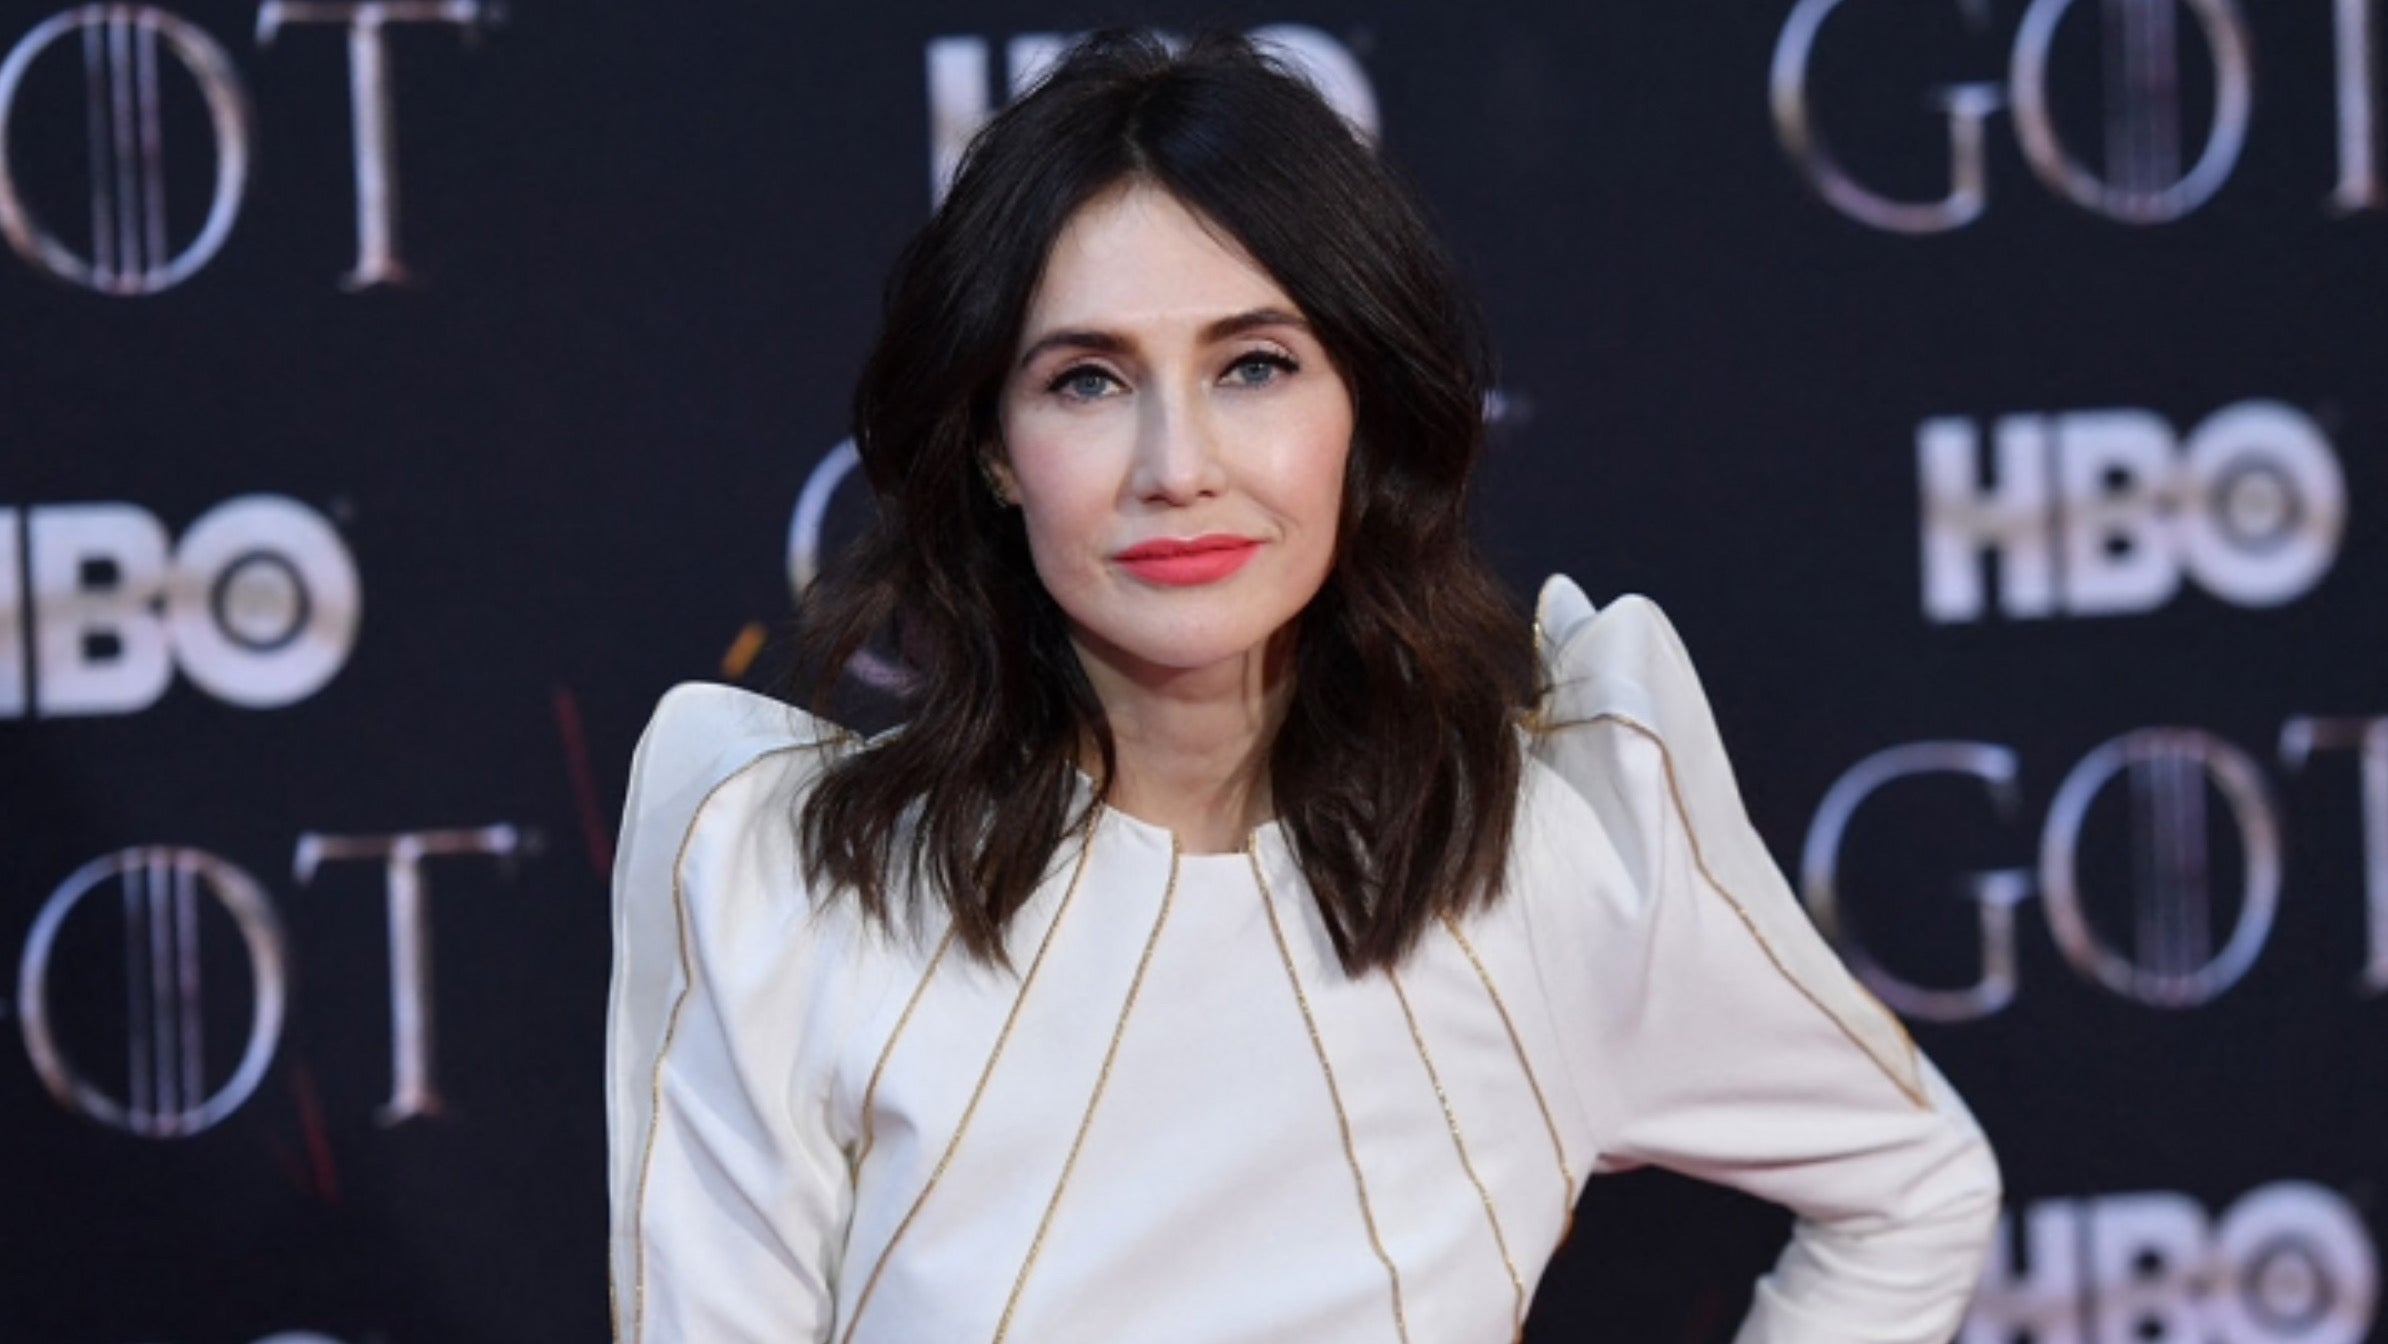 Carice van Houten, “Melisandre” in Game of Thrones, arrested in the Netherlands, Magnate Daily